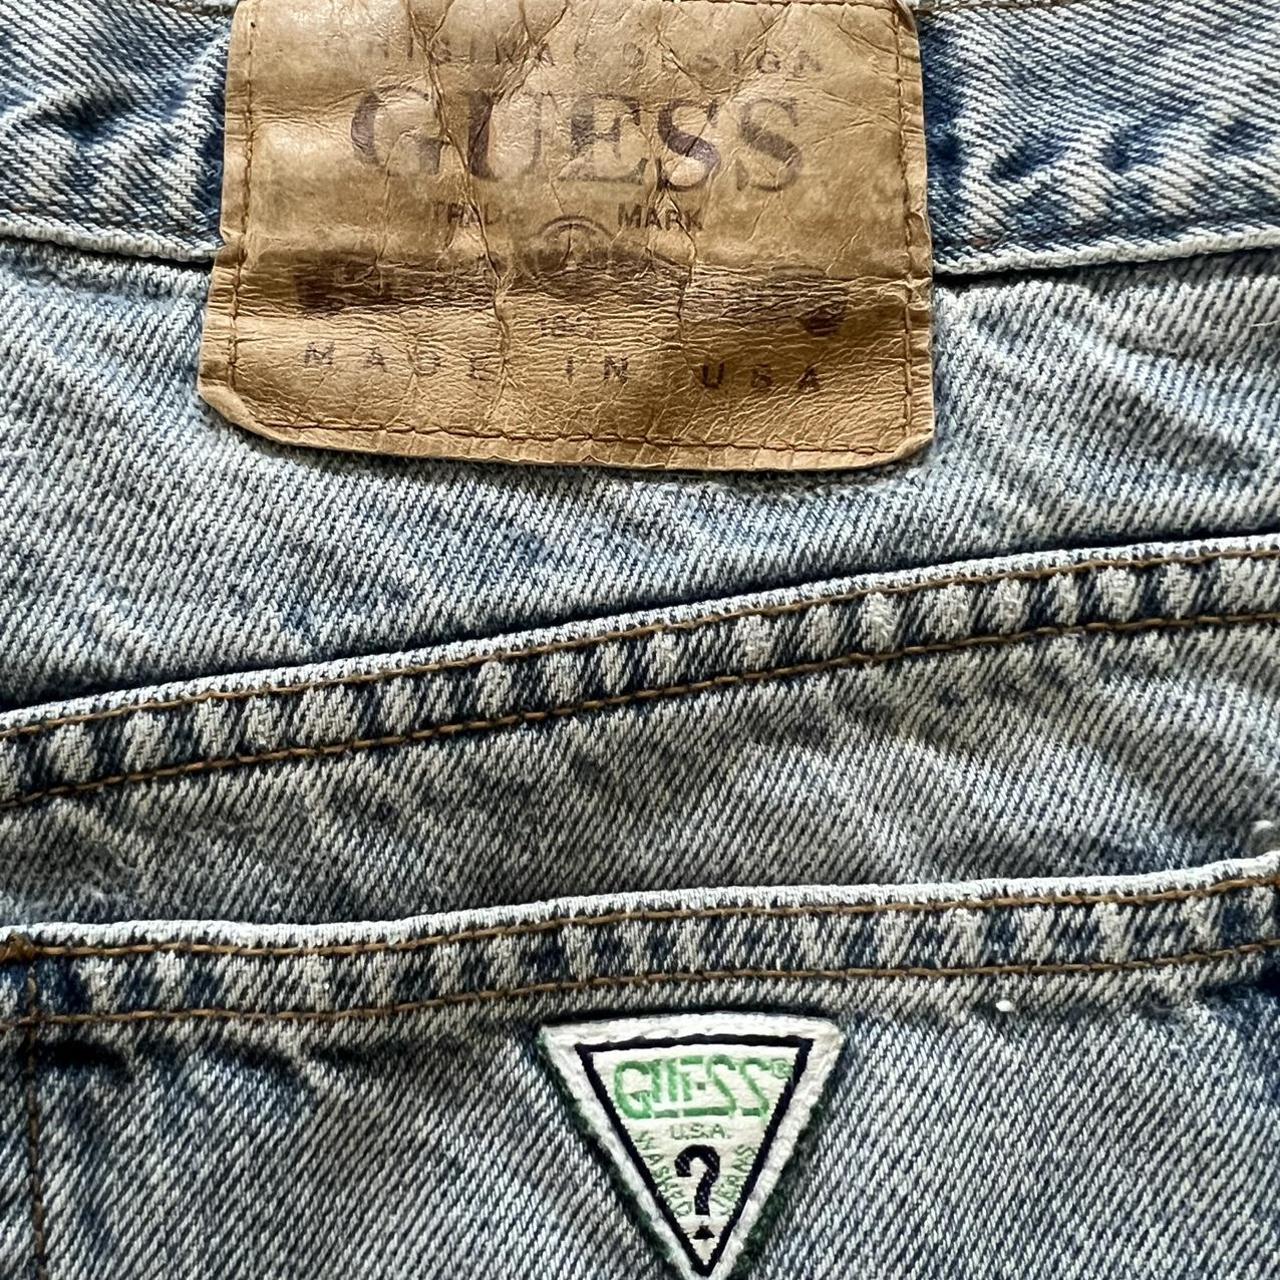 Custom Hand Painted Guess Jeans Size 33 x - Depop